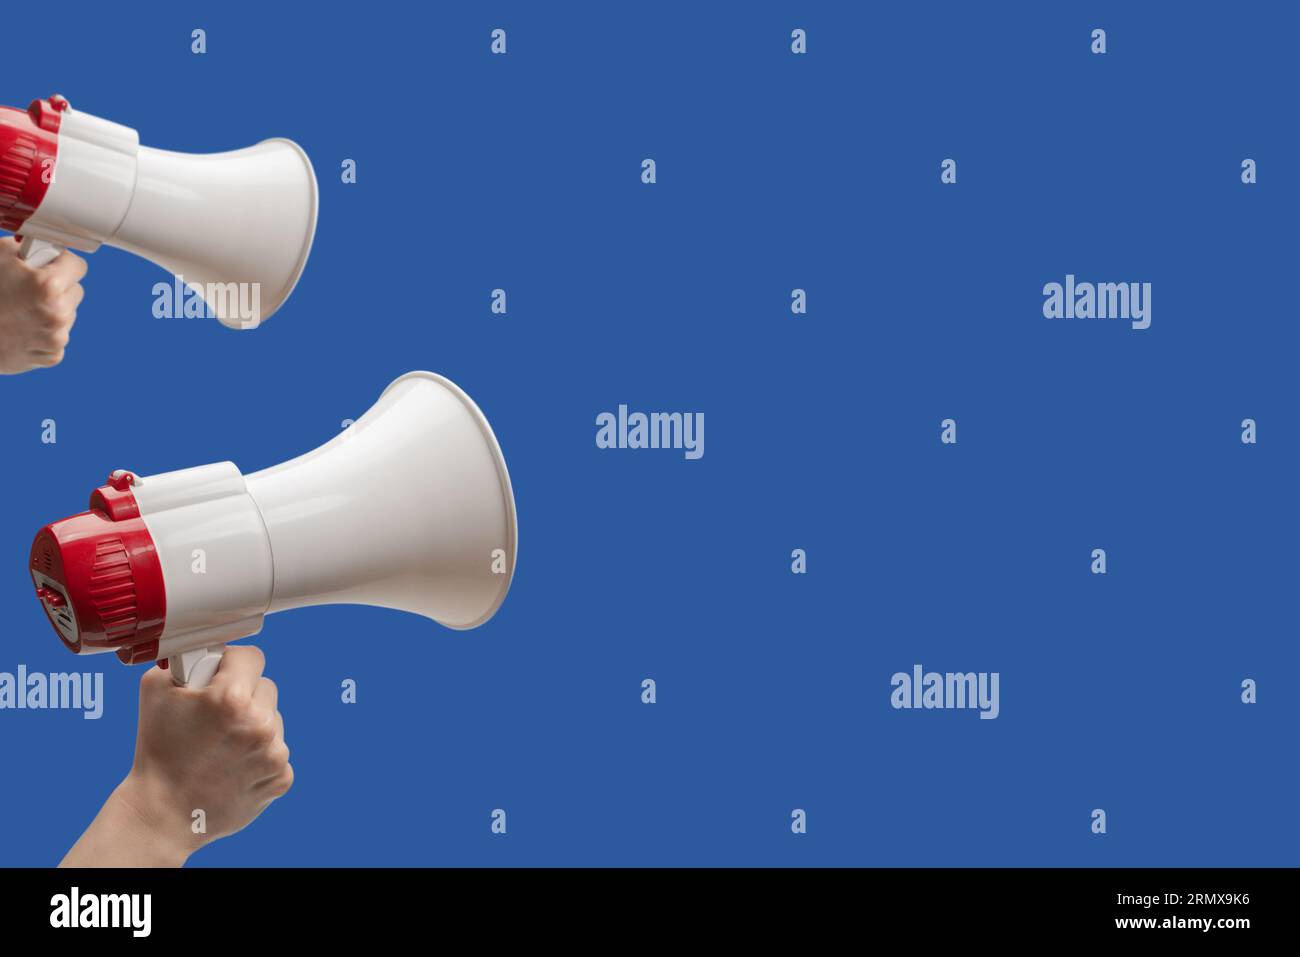 Megaphone in woman hands on a blue background.  Copy space. Stock Photo